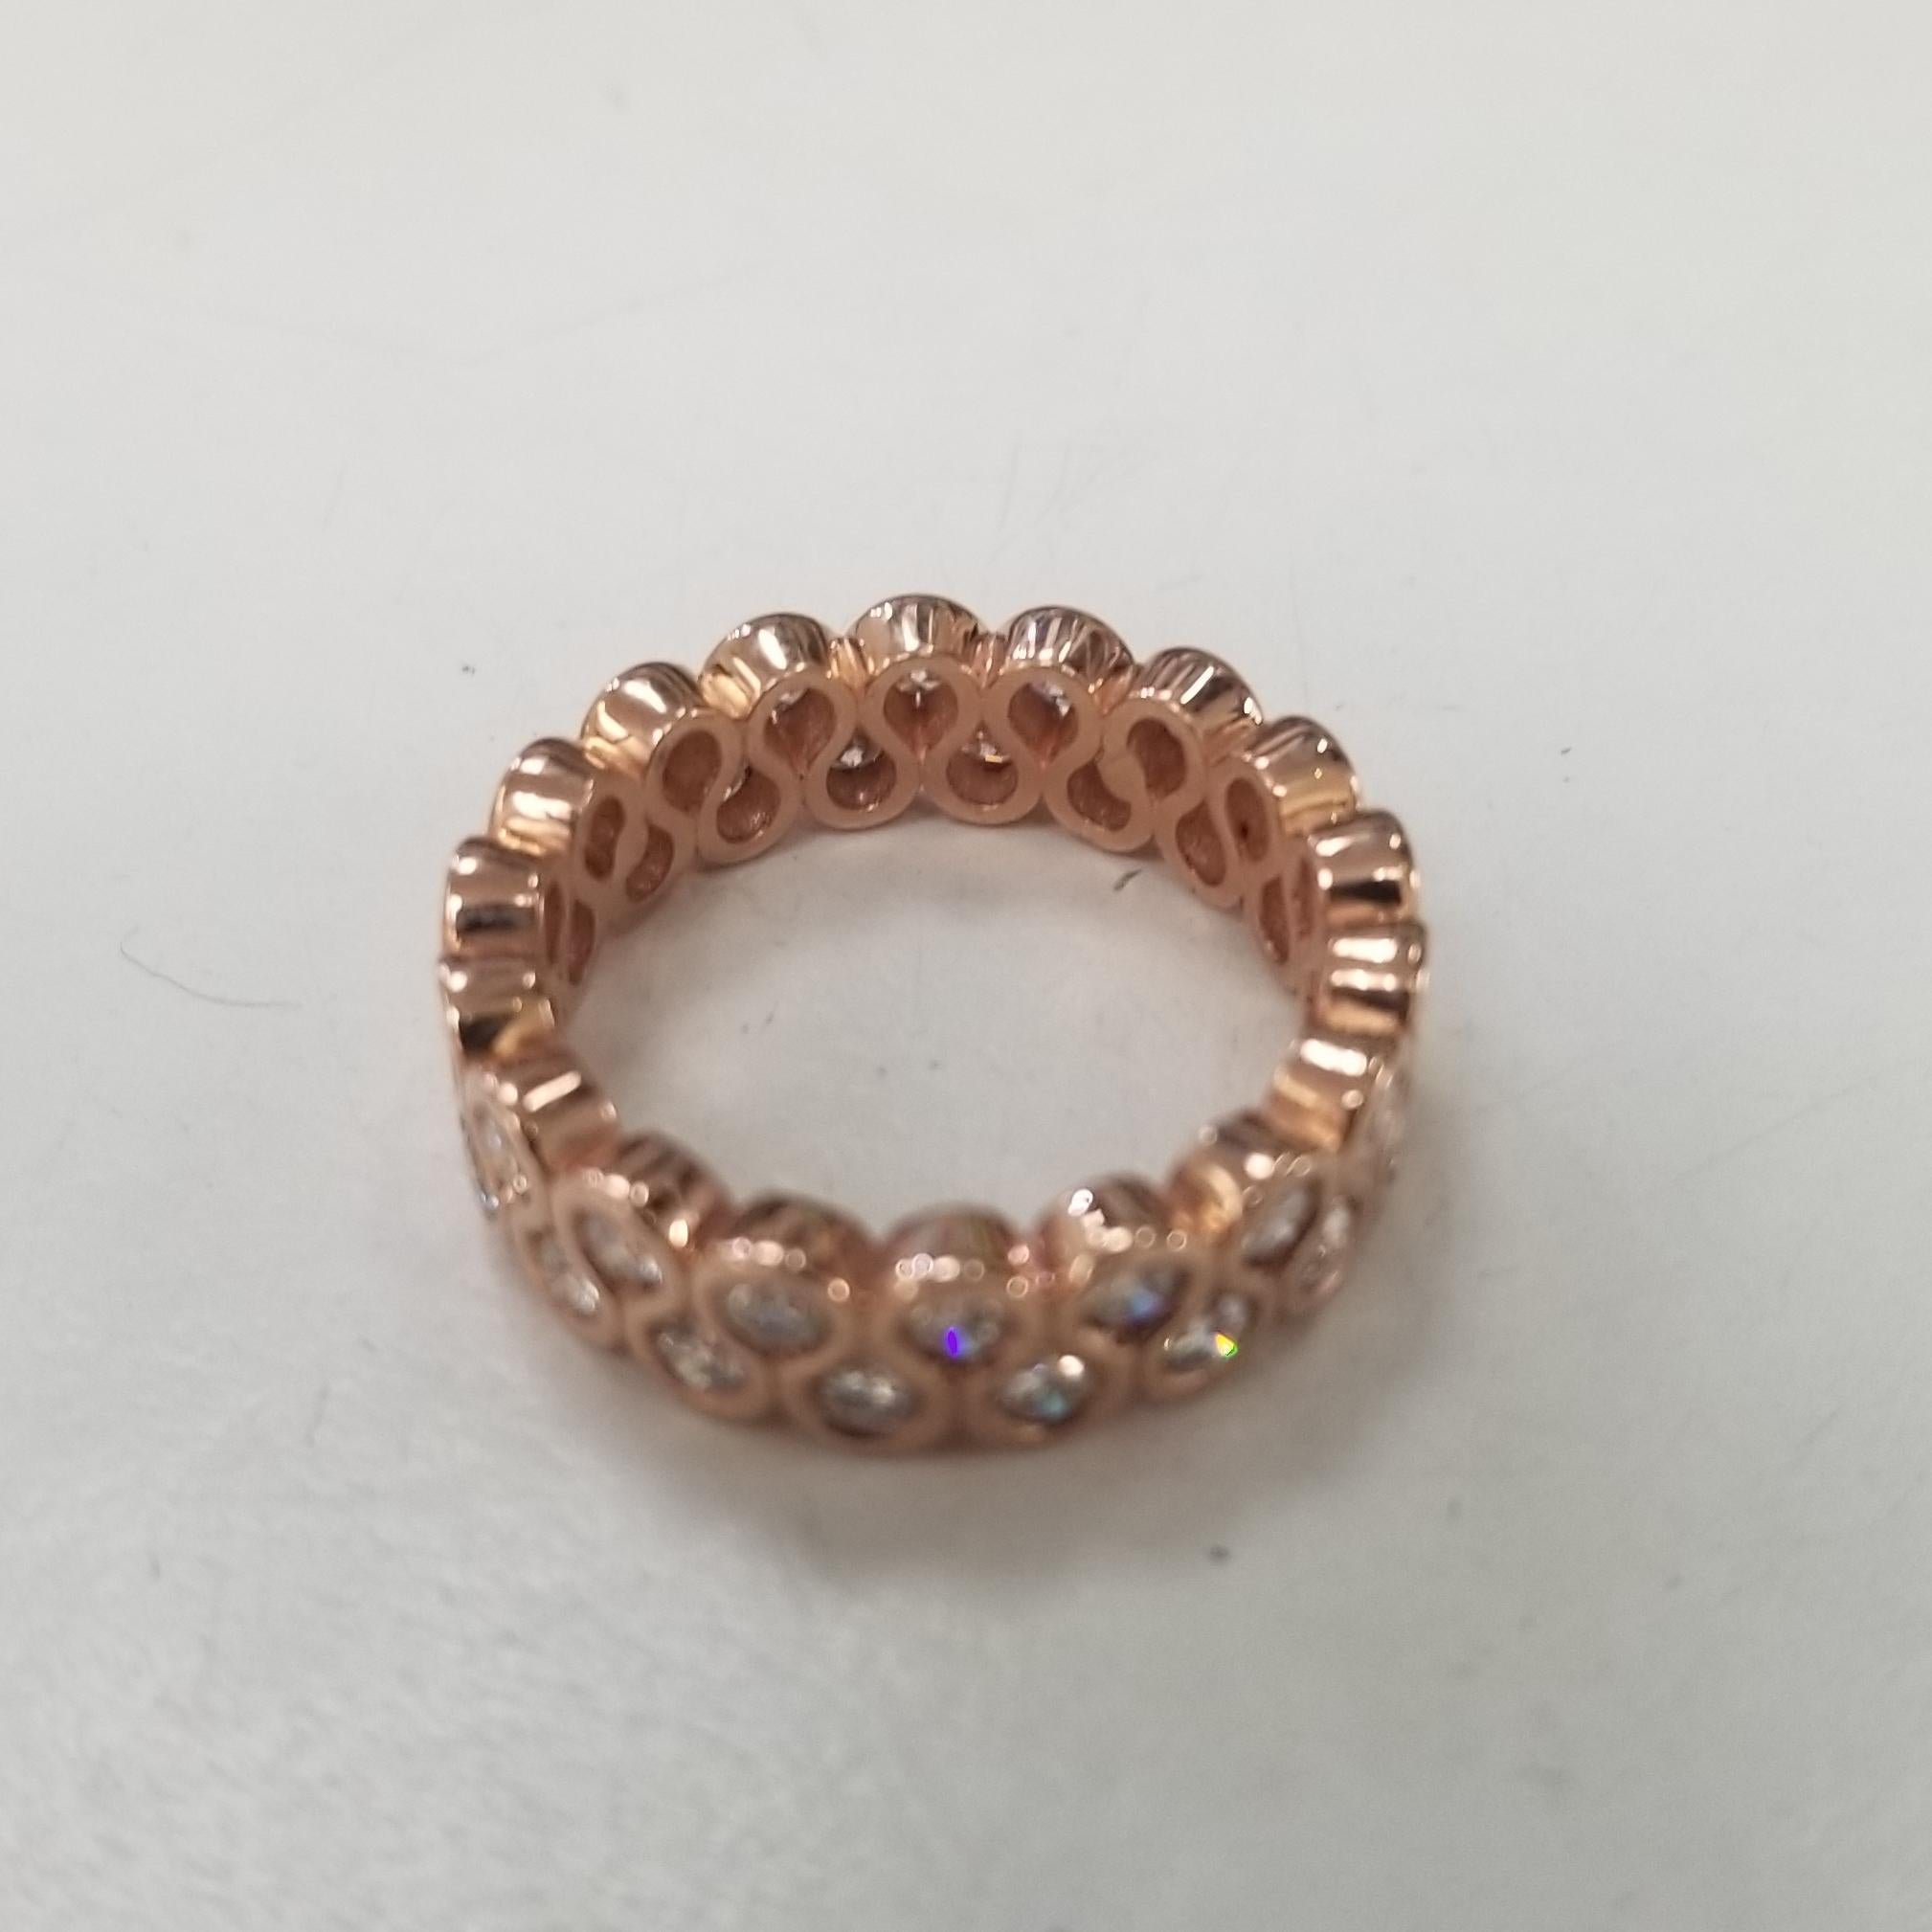 14K rose gold 1.65 Carats 2 row staggered eternity ring
Specifications:
    main stone: BRILLIANT CUT DIAMOND
    diamonds: 38 PIECES
    carat total weight: 1.65
    color:  G
    clarity: VS2 
    metal: 14k white rose (can be made in any color